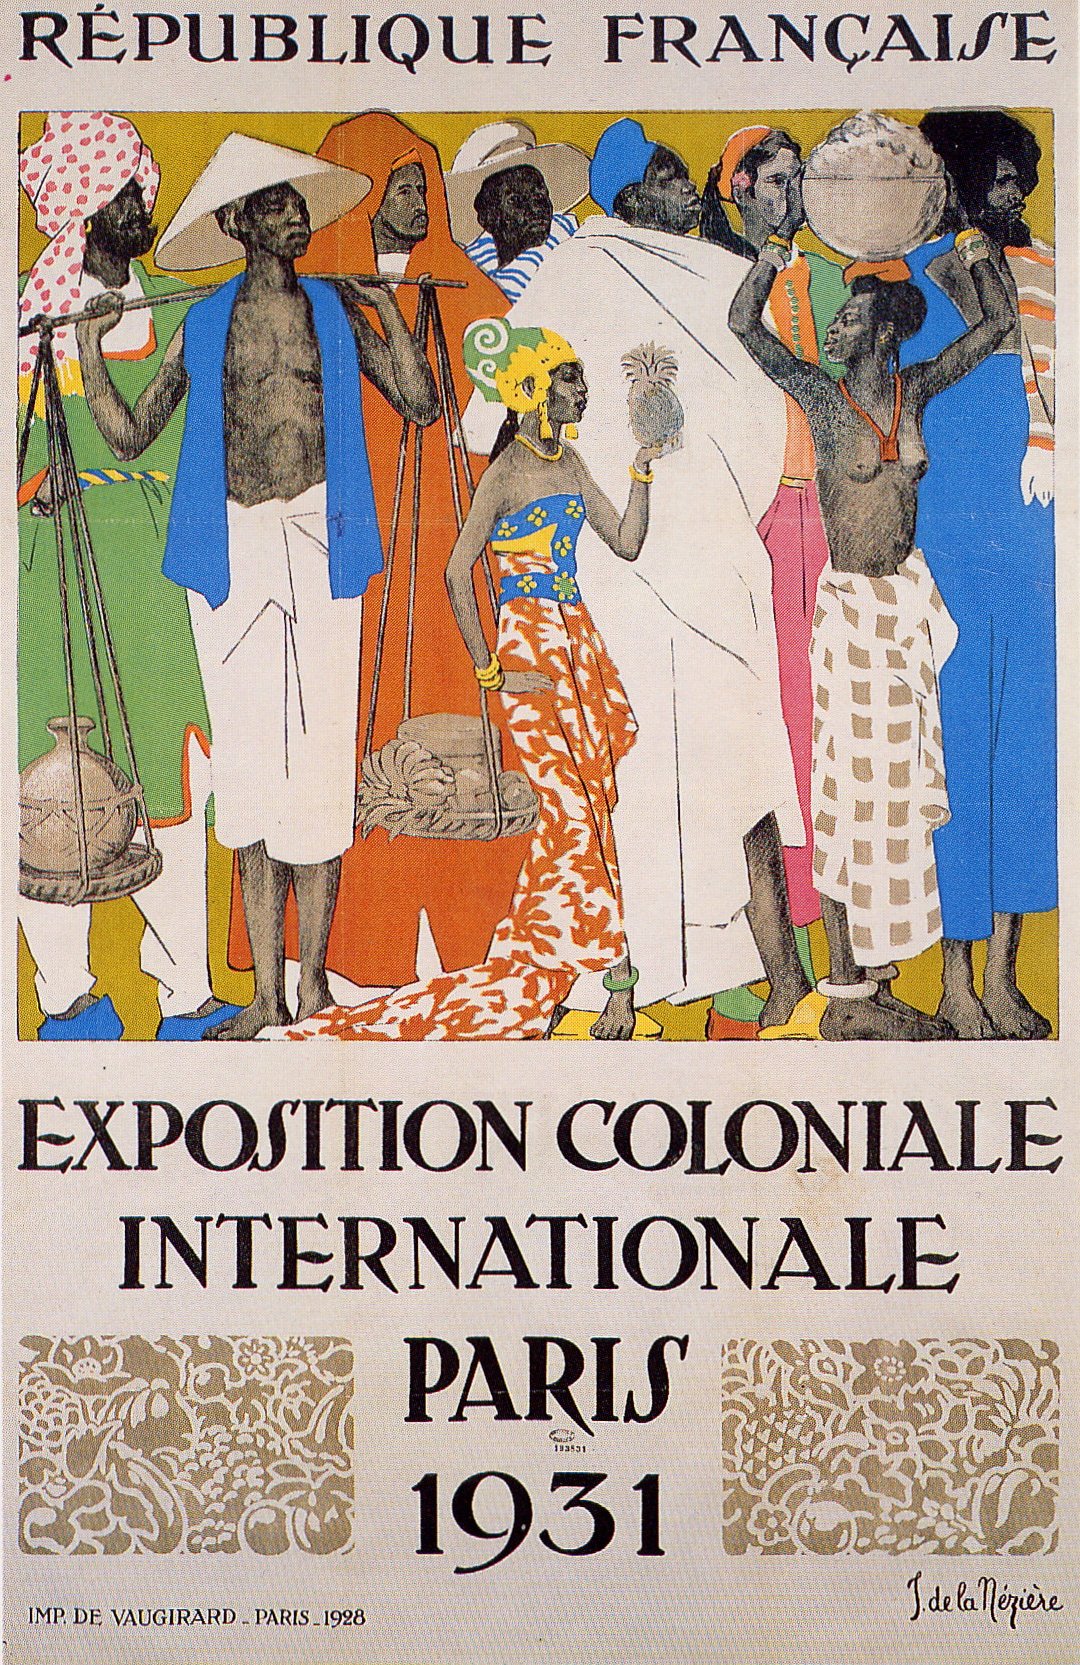 http://fr.academic.ru/pictures/frwiki/69/Expo_1931_Affiche1.jpg